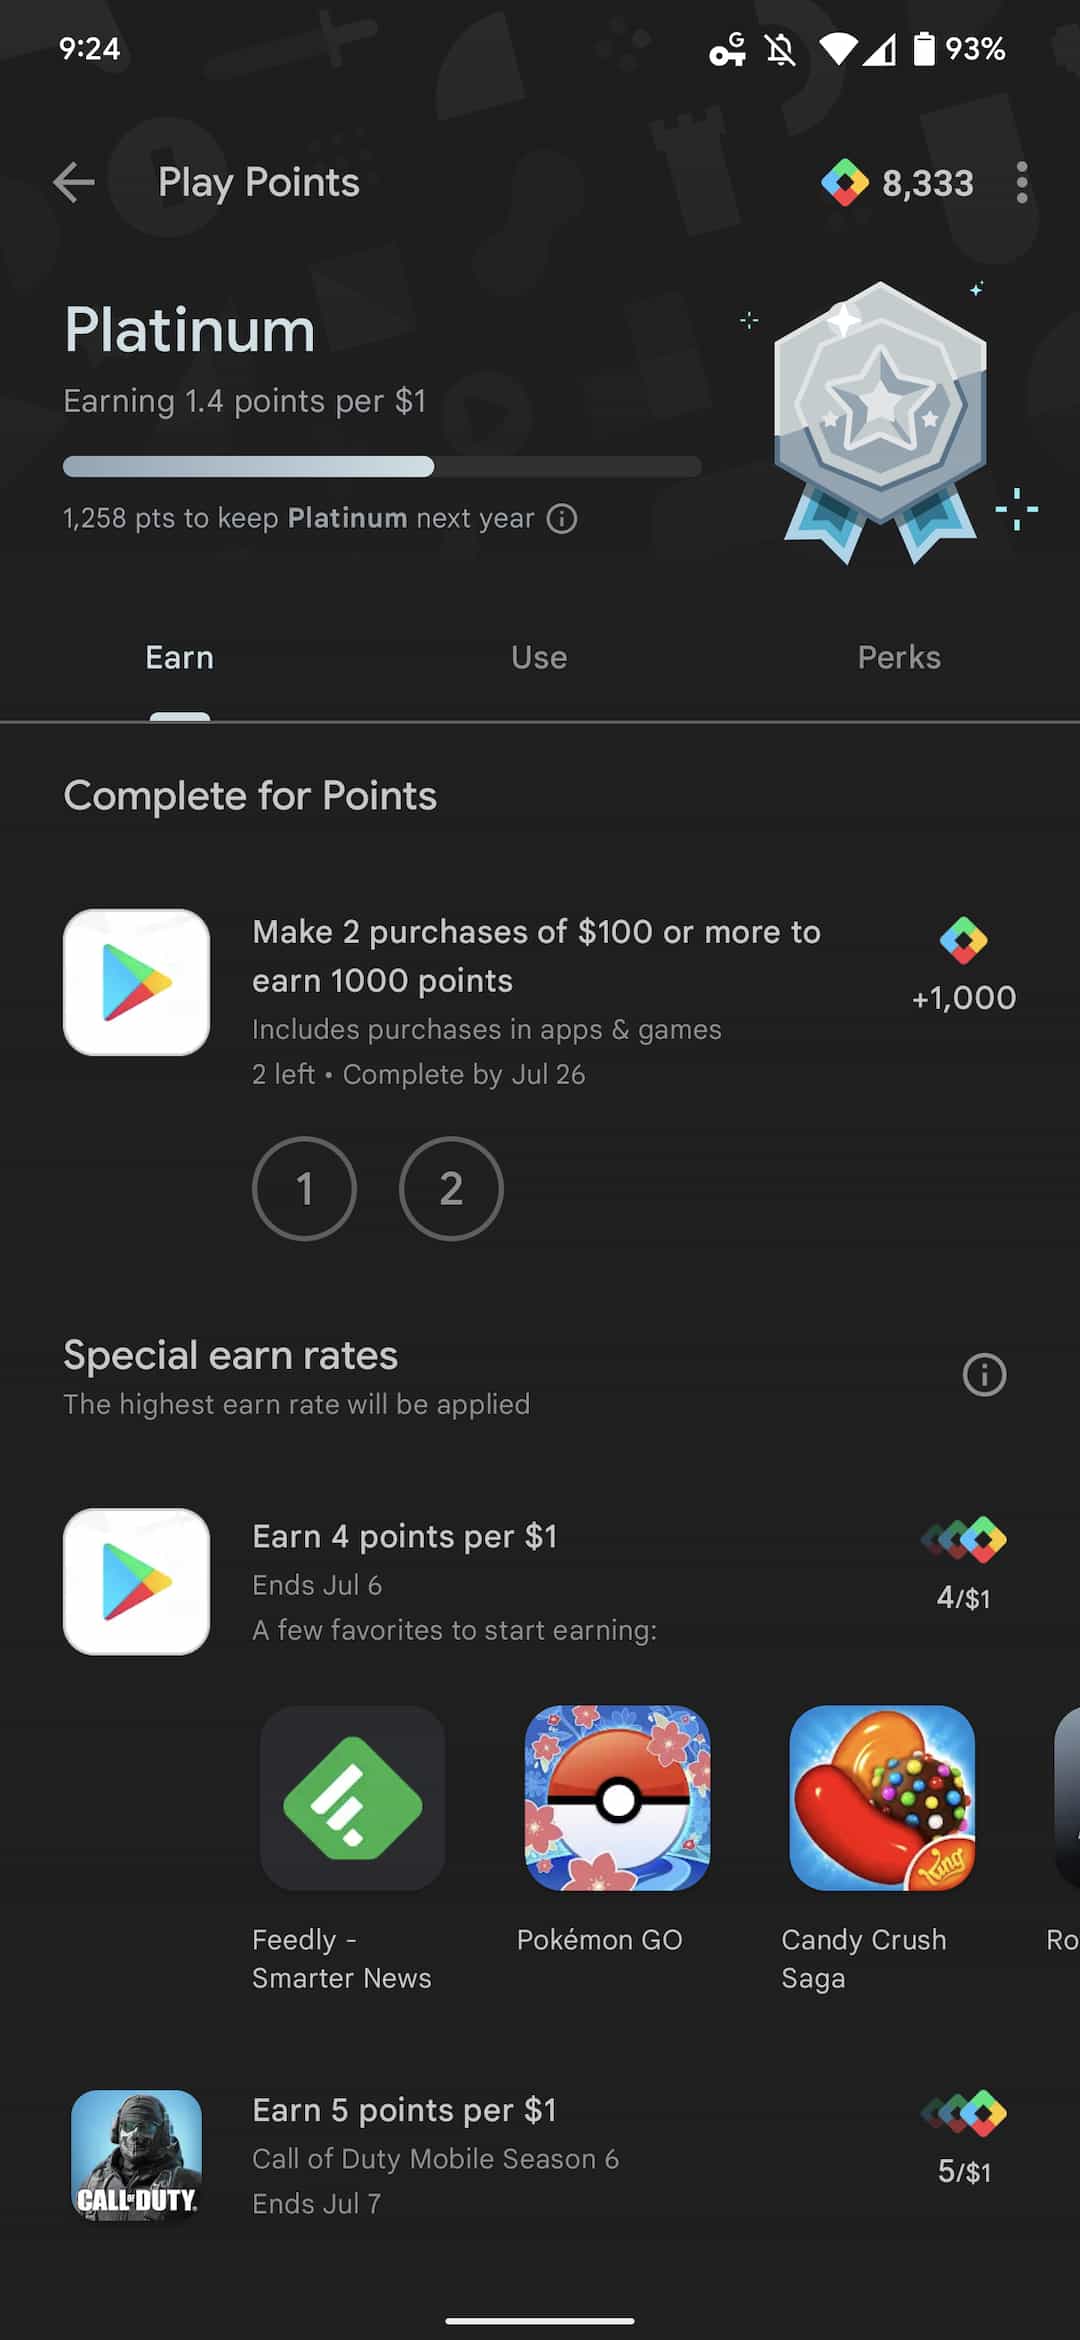 Google Play Points whales